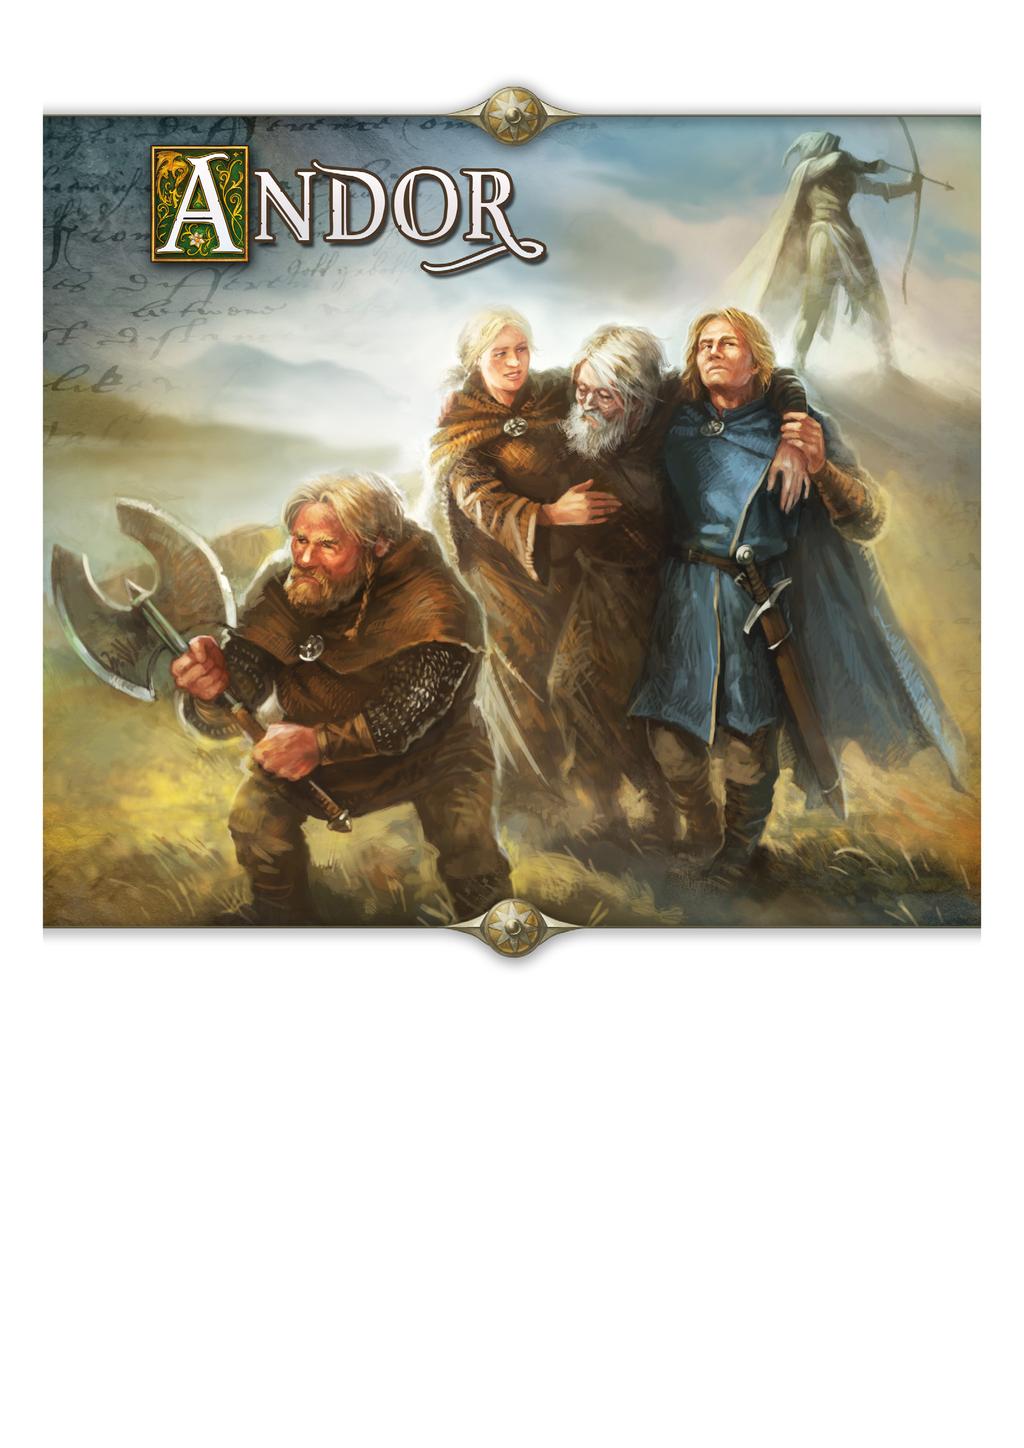 This legend takes place after Legend 3: The Days of Resistance and introduces elements from Legend 4: Secrets of the Mine. The people of Andor can finally breathe.